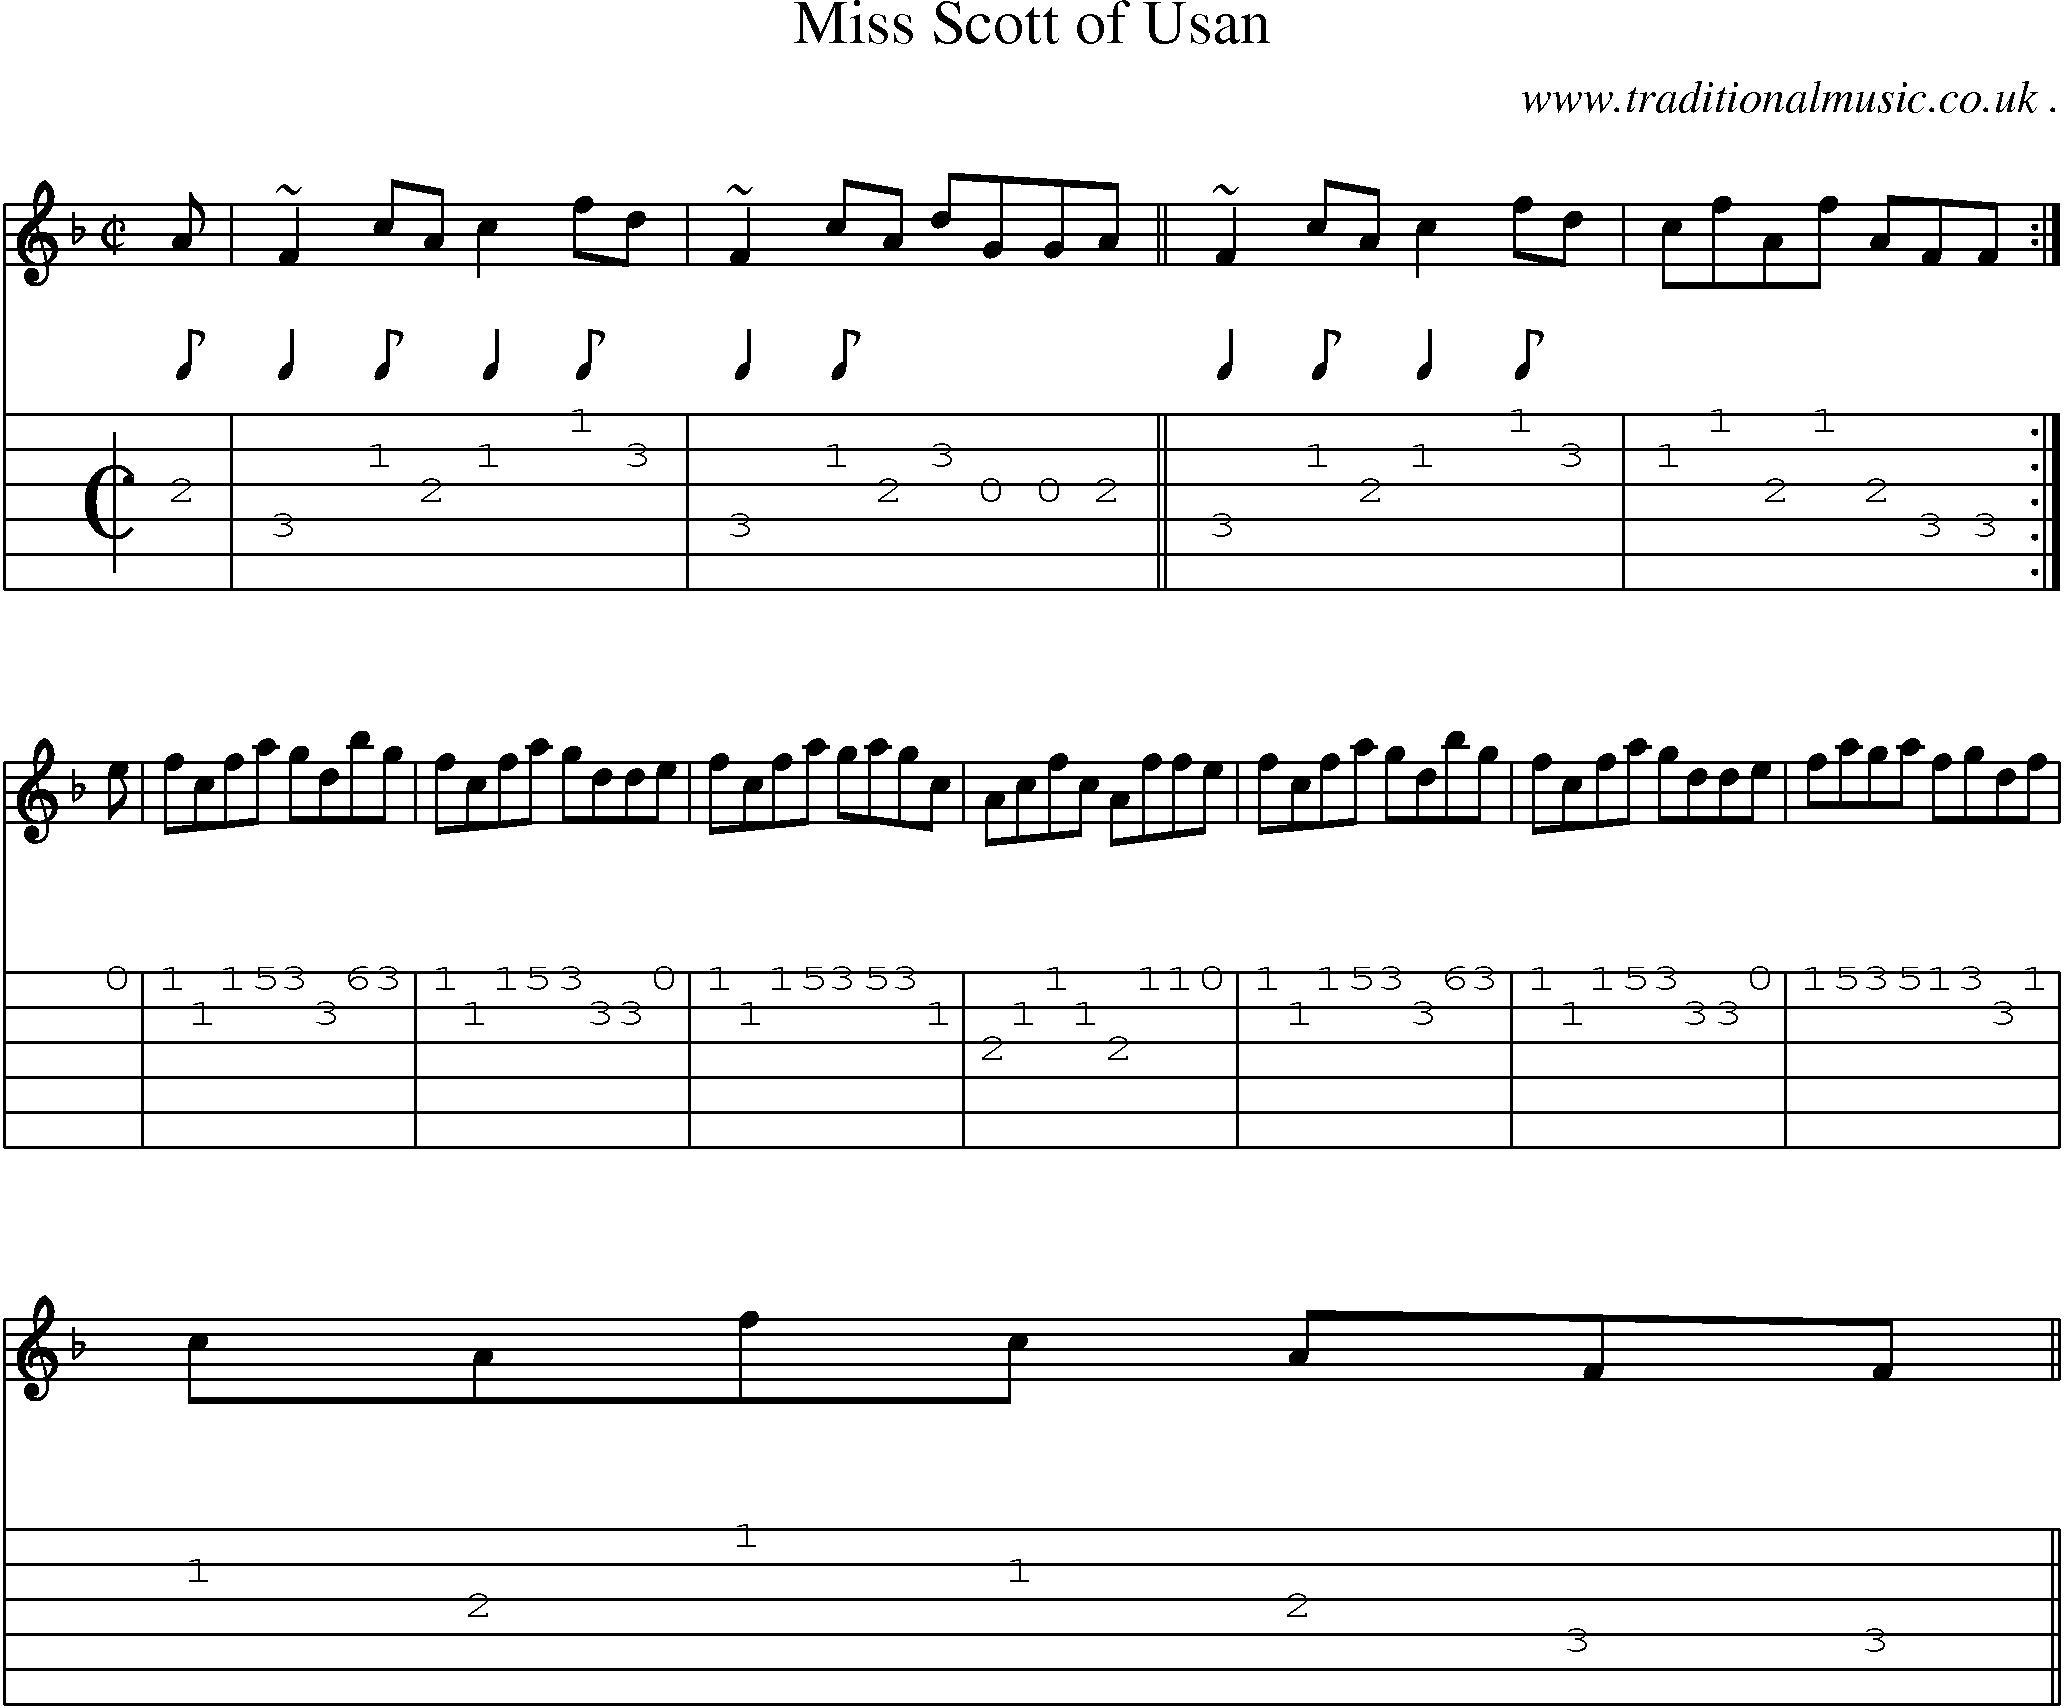 Sheet-music  score, Chords and Guitar Tabs for Miss Scott Of Usan